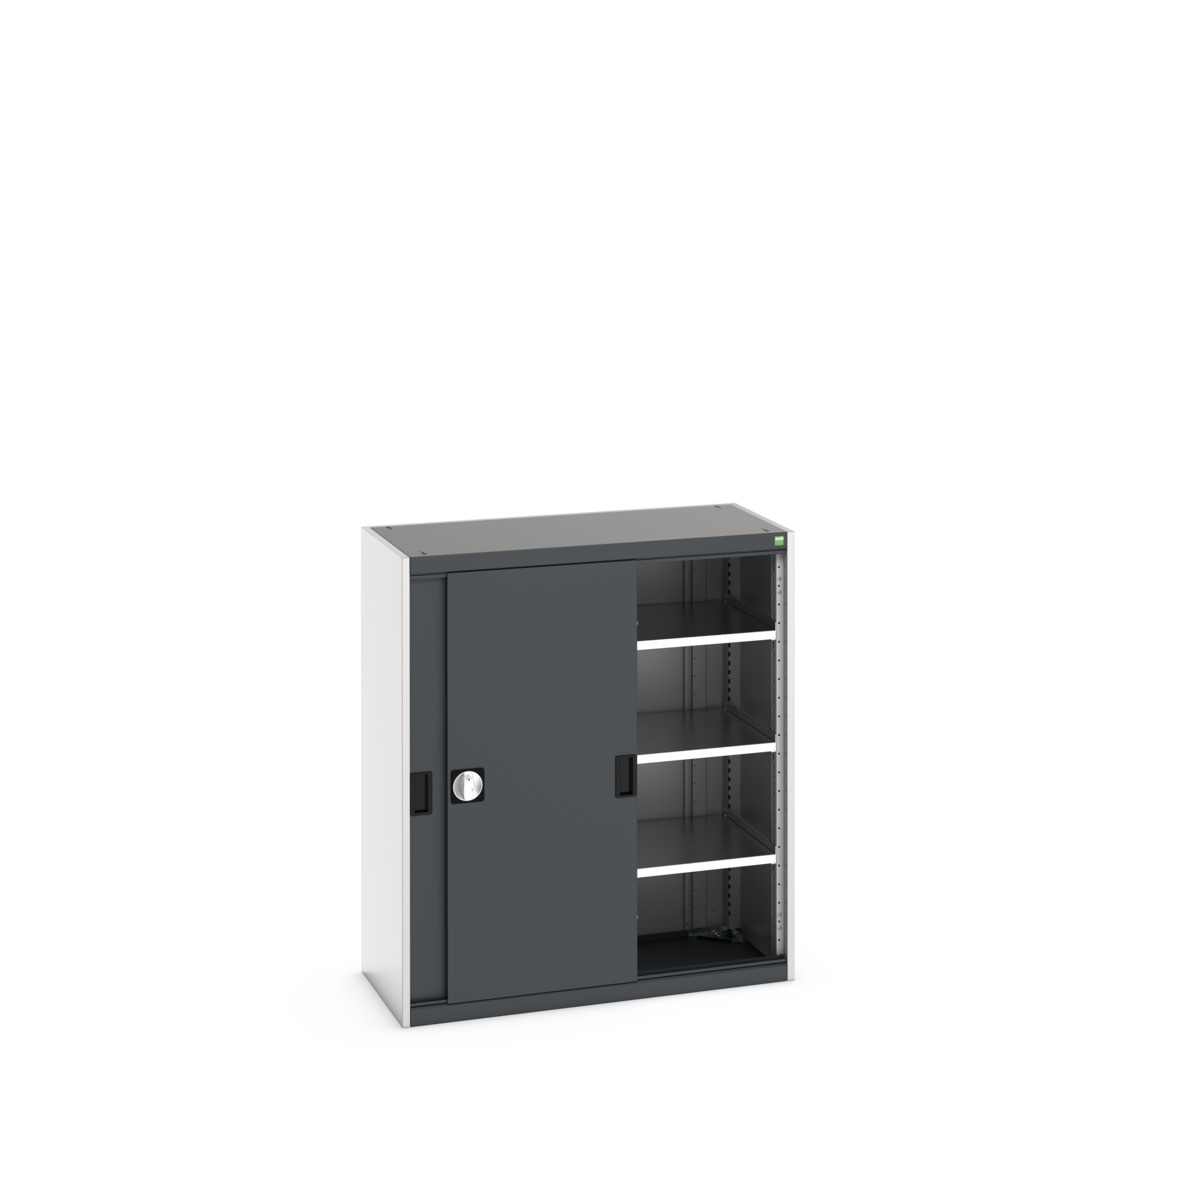 40013069.19V - Armoire Cubio SMS-10512-1.1